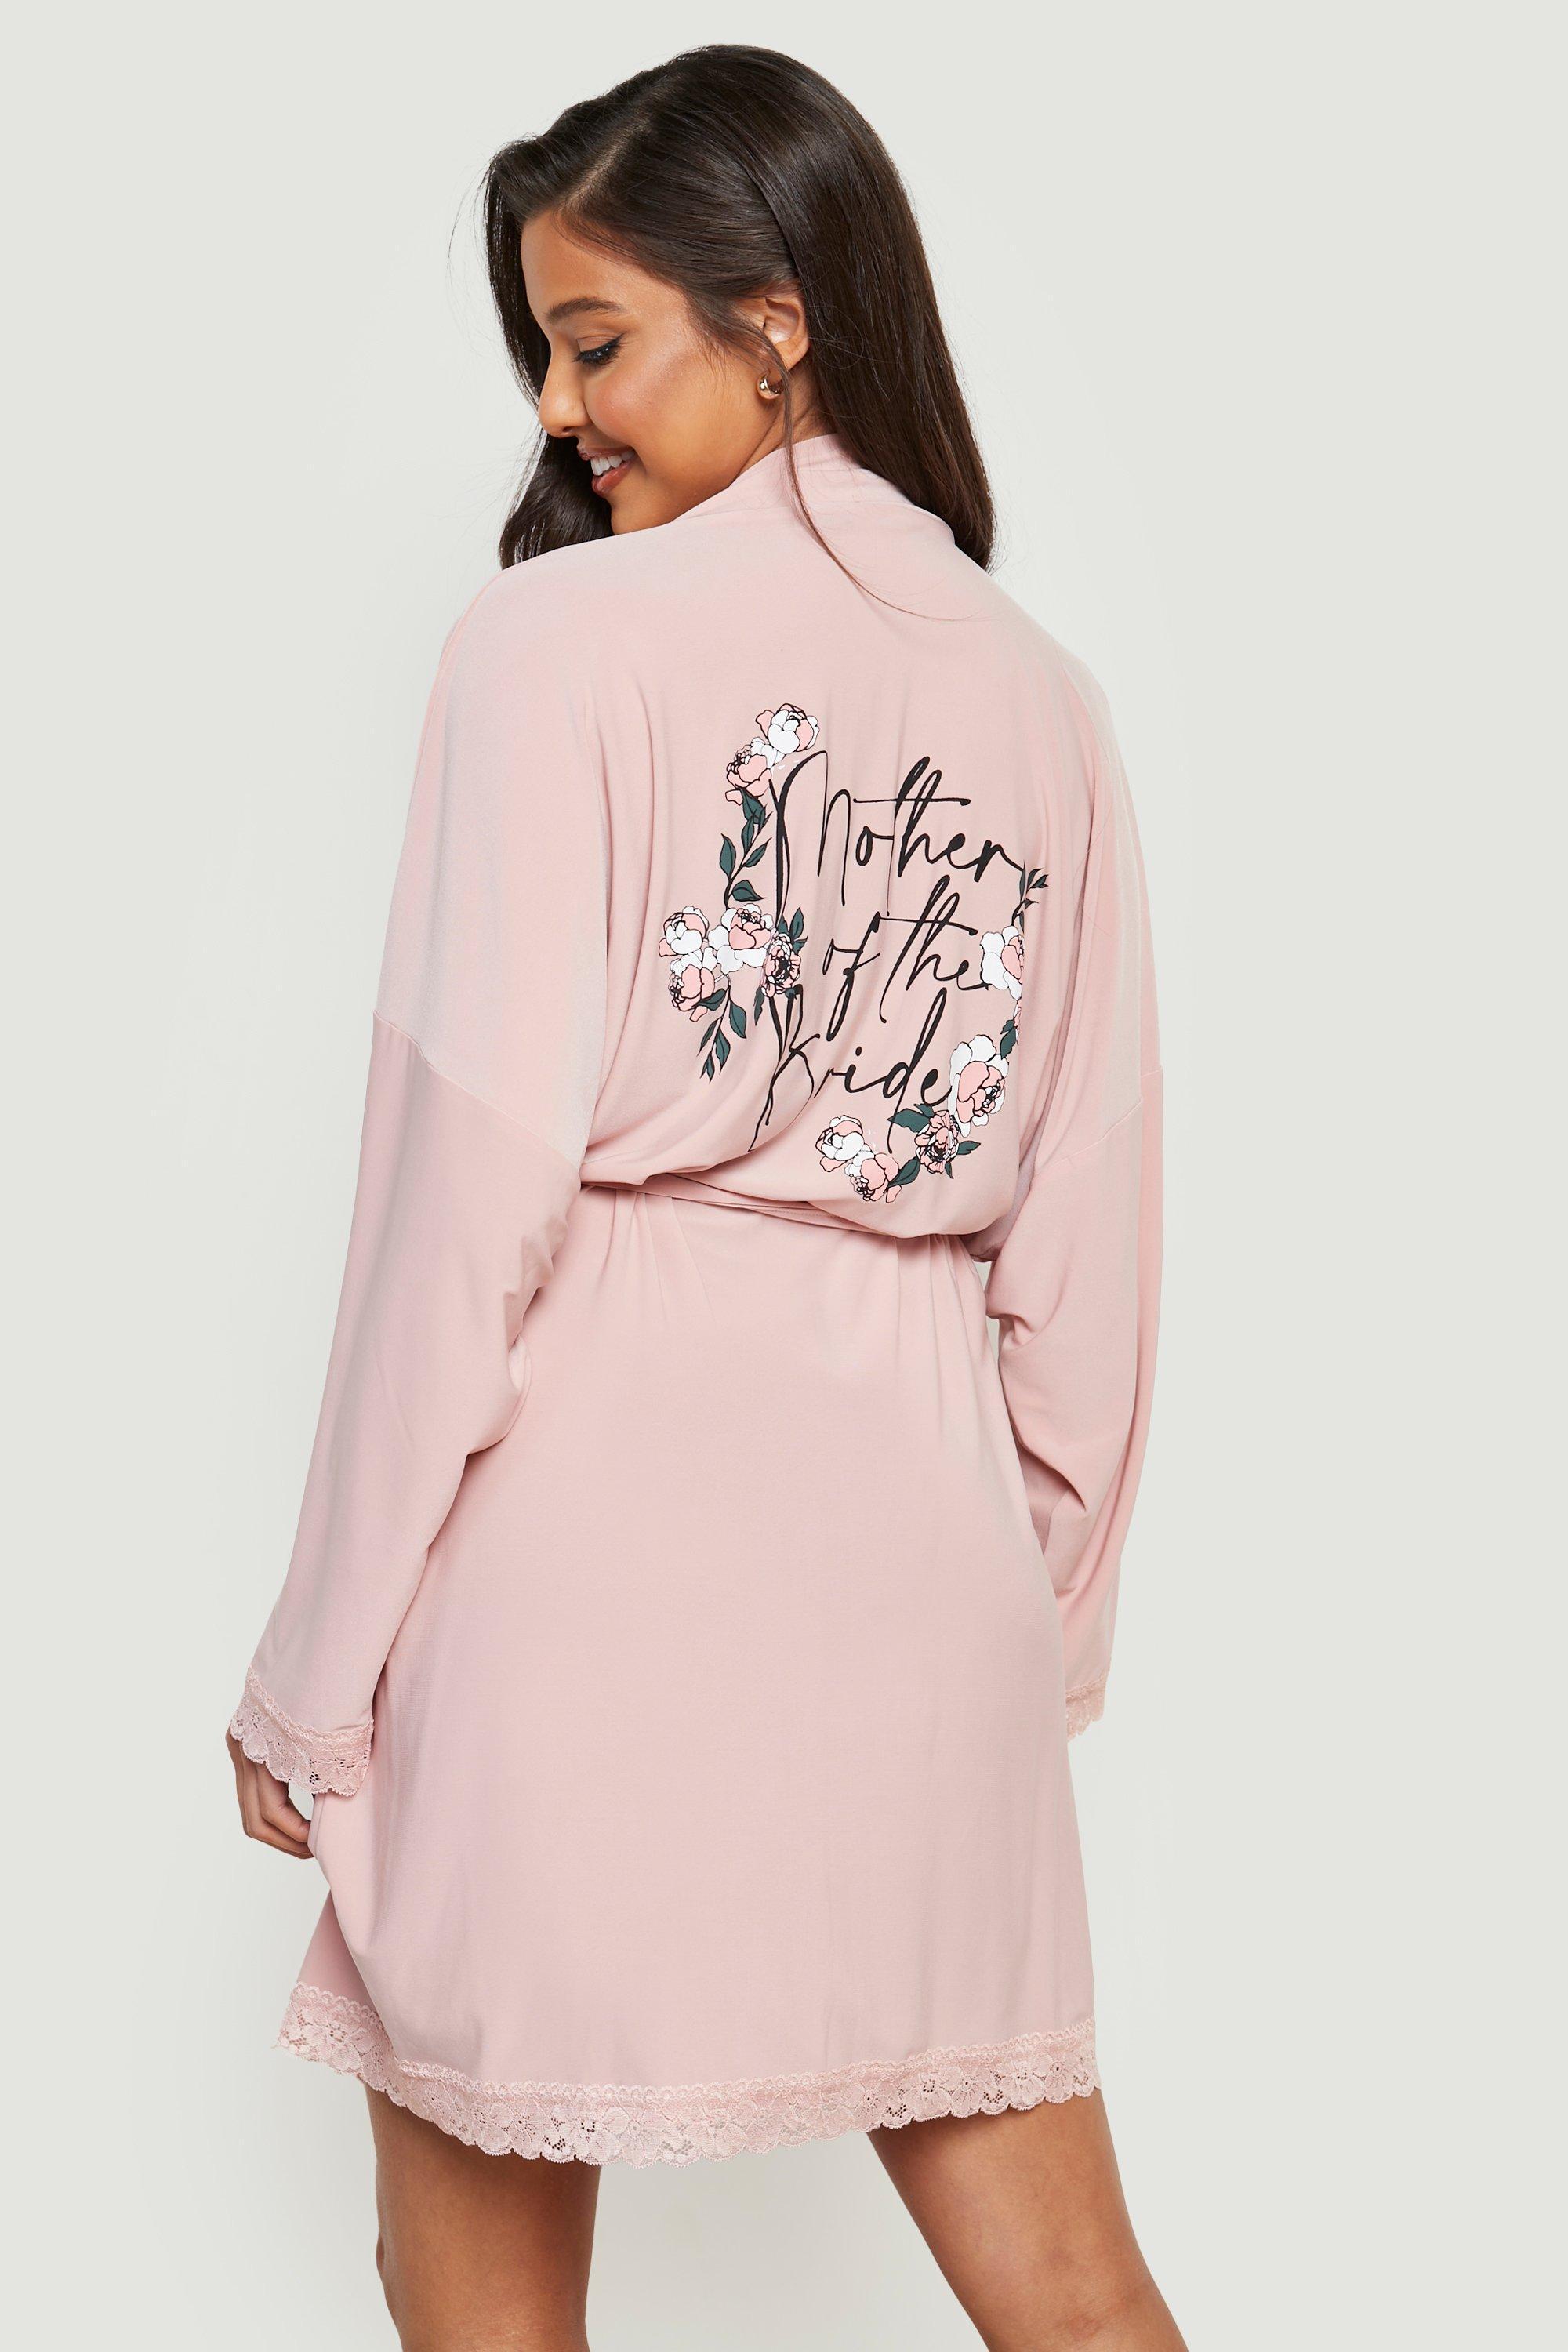 Boohoo Mother Of The Bride Floral Lace Trim Robe in Pink